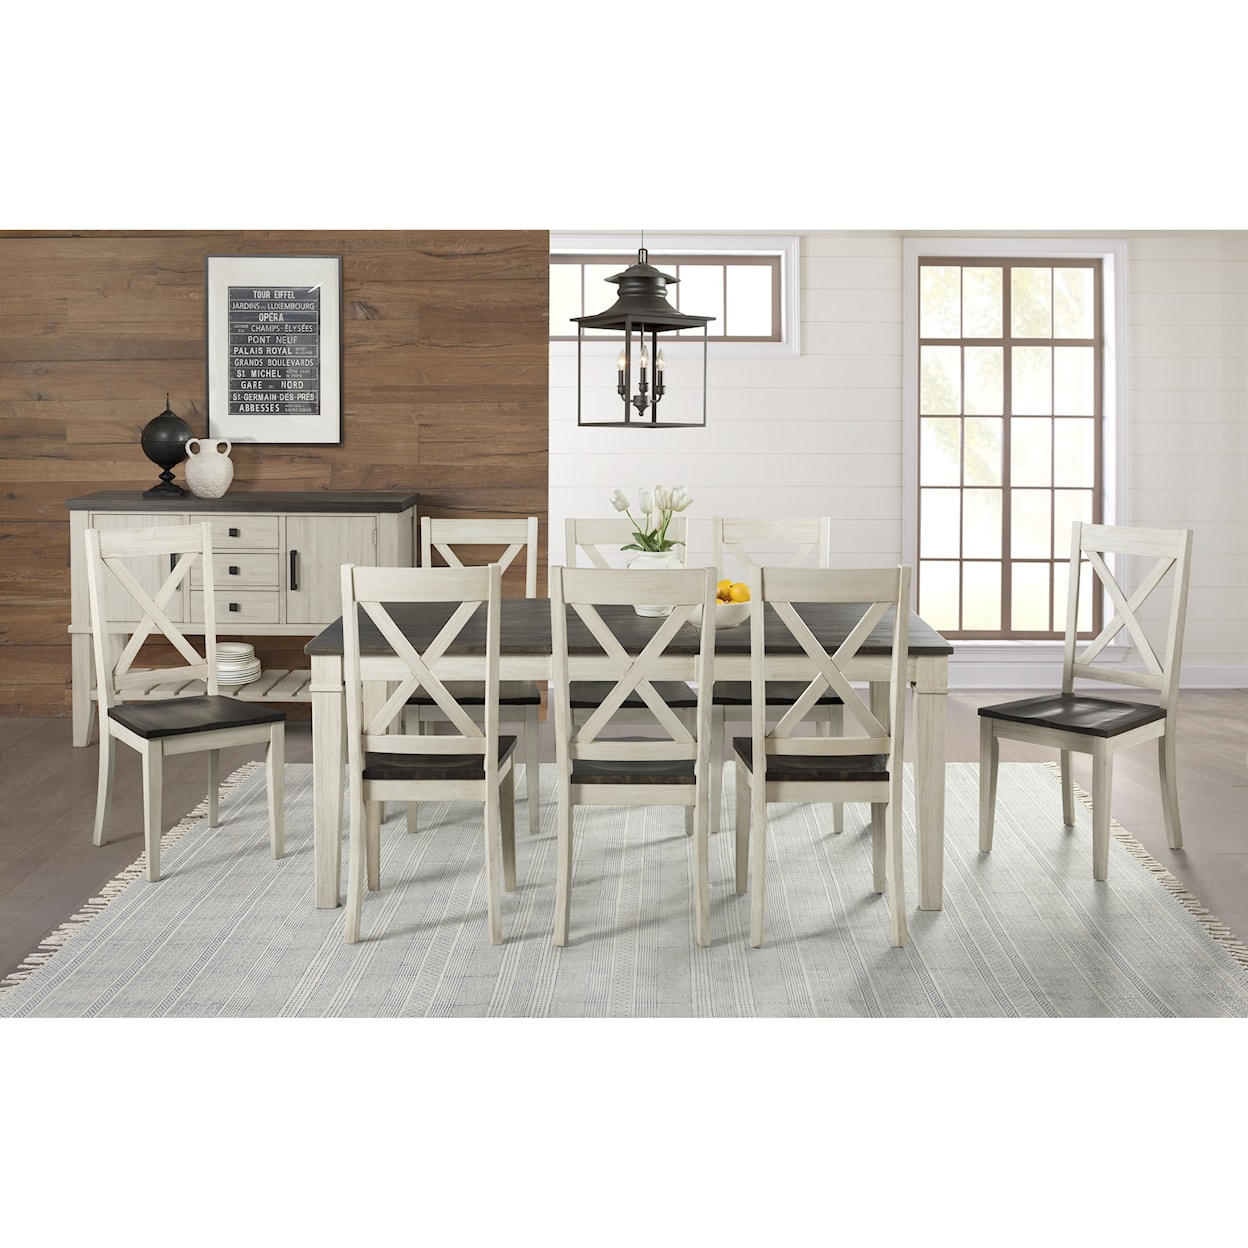 AAmerica Huron Formal Dining Room Group